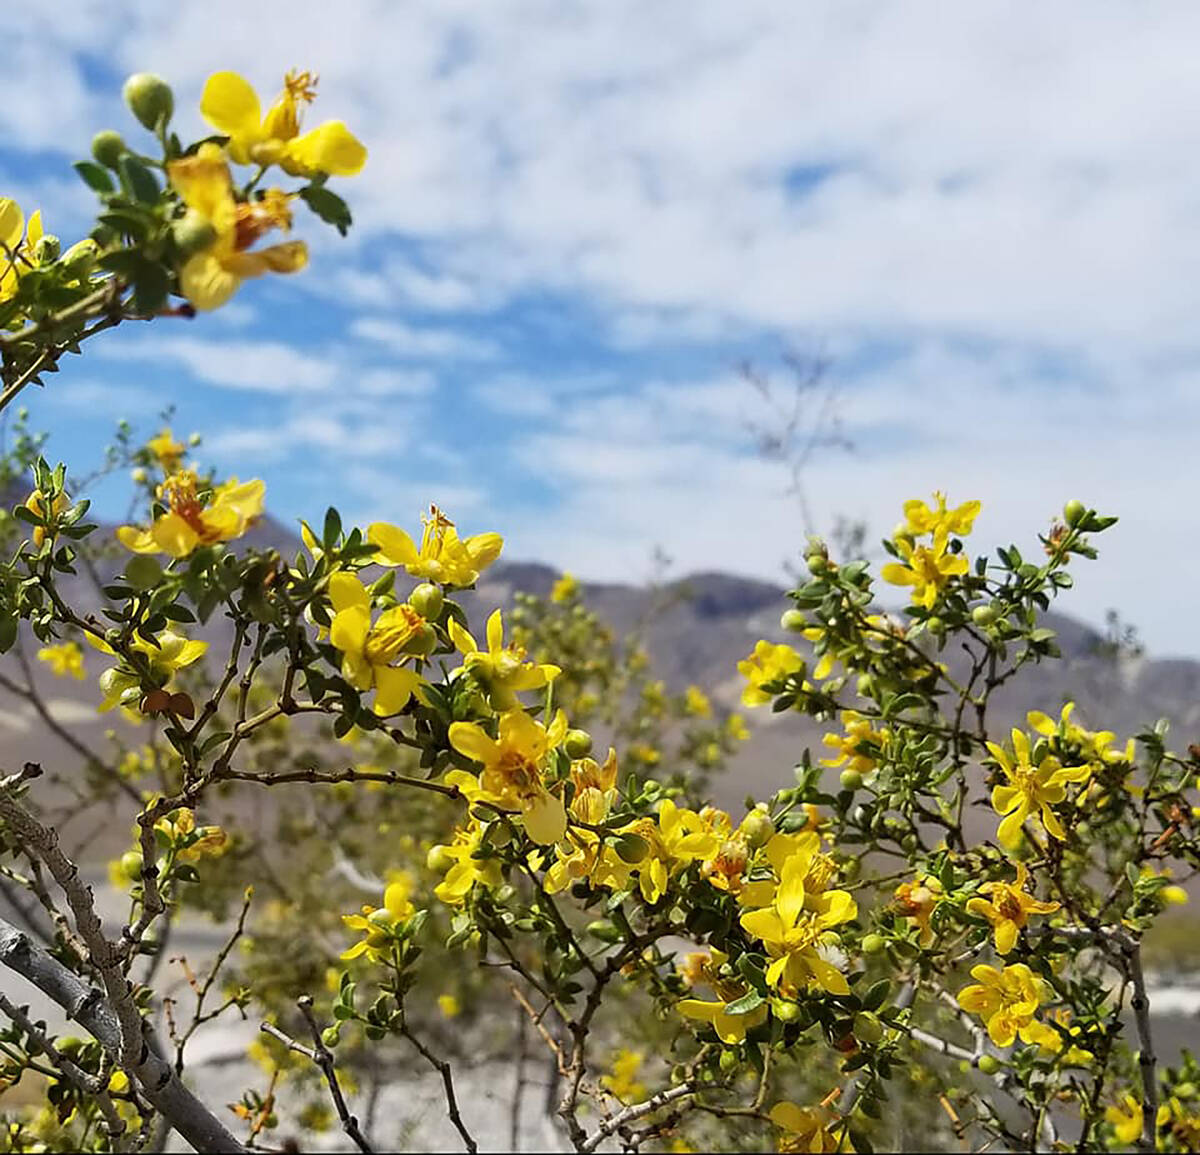 Creosote bush in bloom at Death Valley National Park. (Natalie Burt/Special to the Las Vegas Re ...